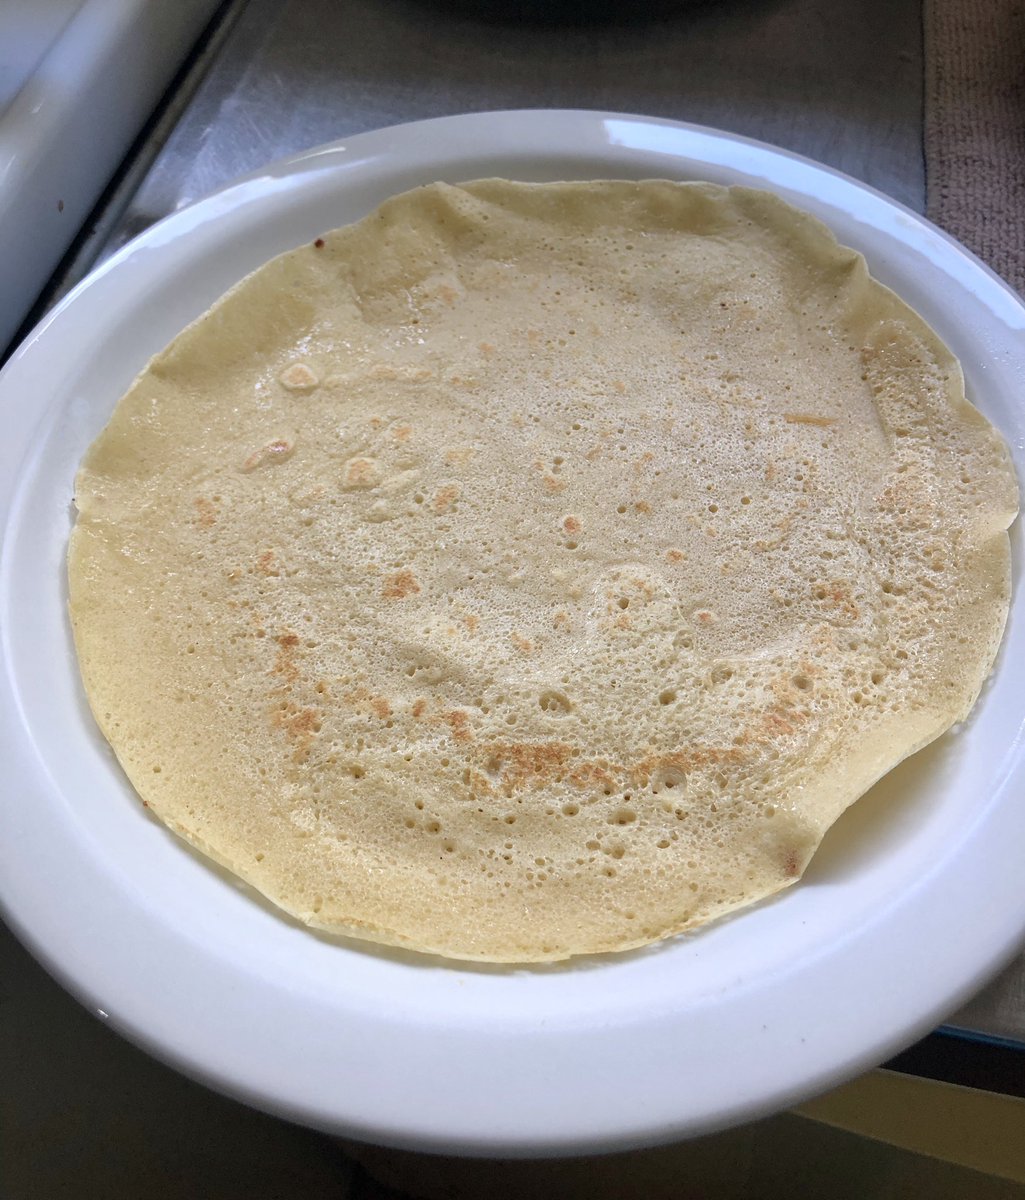 5/n with all the bits and bobs prepped, make your tortillas. Super Rueda makes very elastic and big wheat flour crepés. basic crepé mix & rest for 40 minutes at room temperature to allow the gluten to unroll. Coeliac friends: replace with what works for you   #burritoday